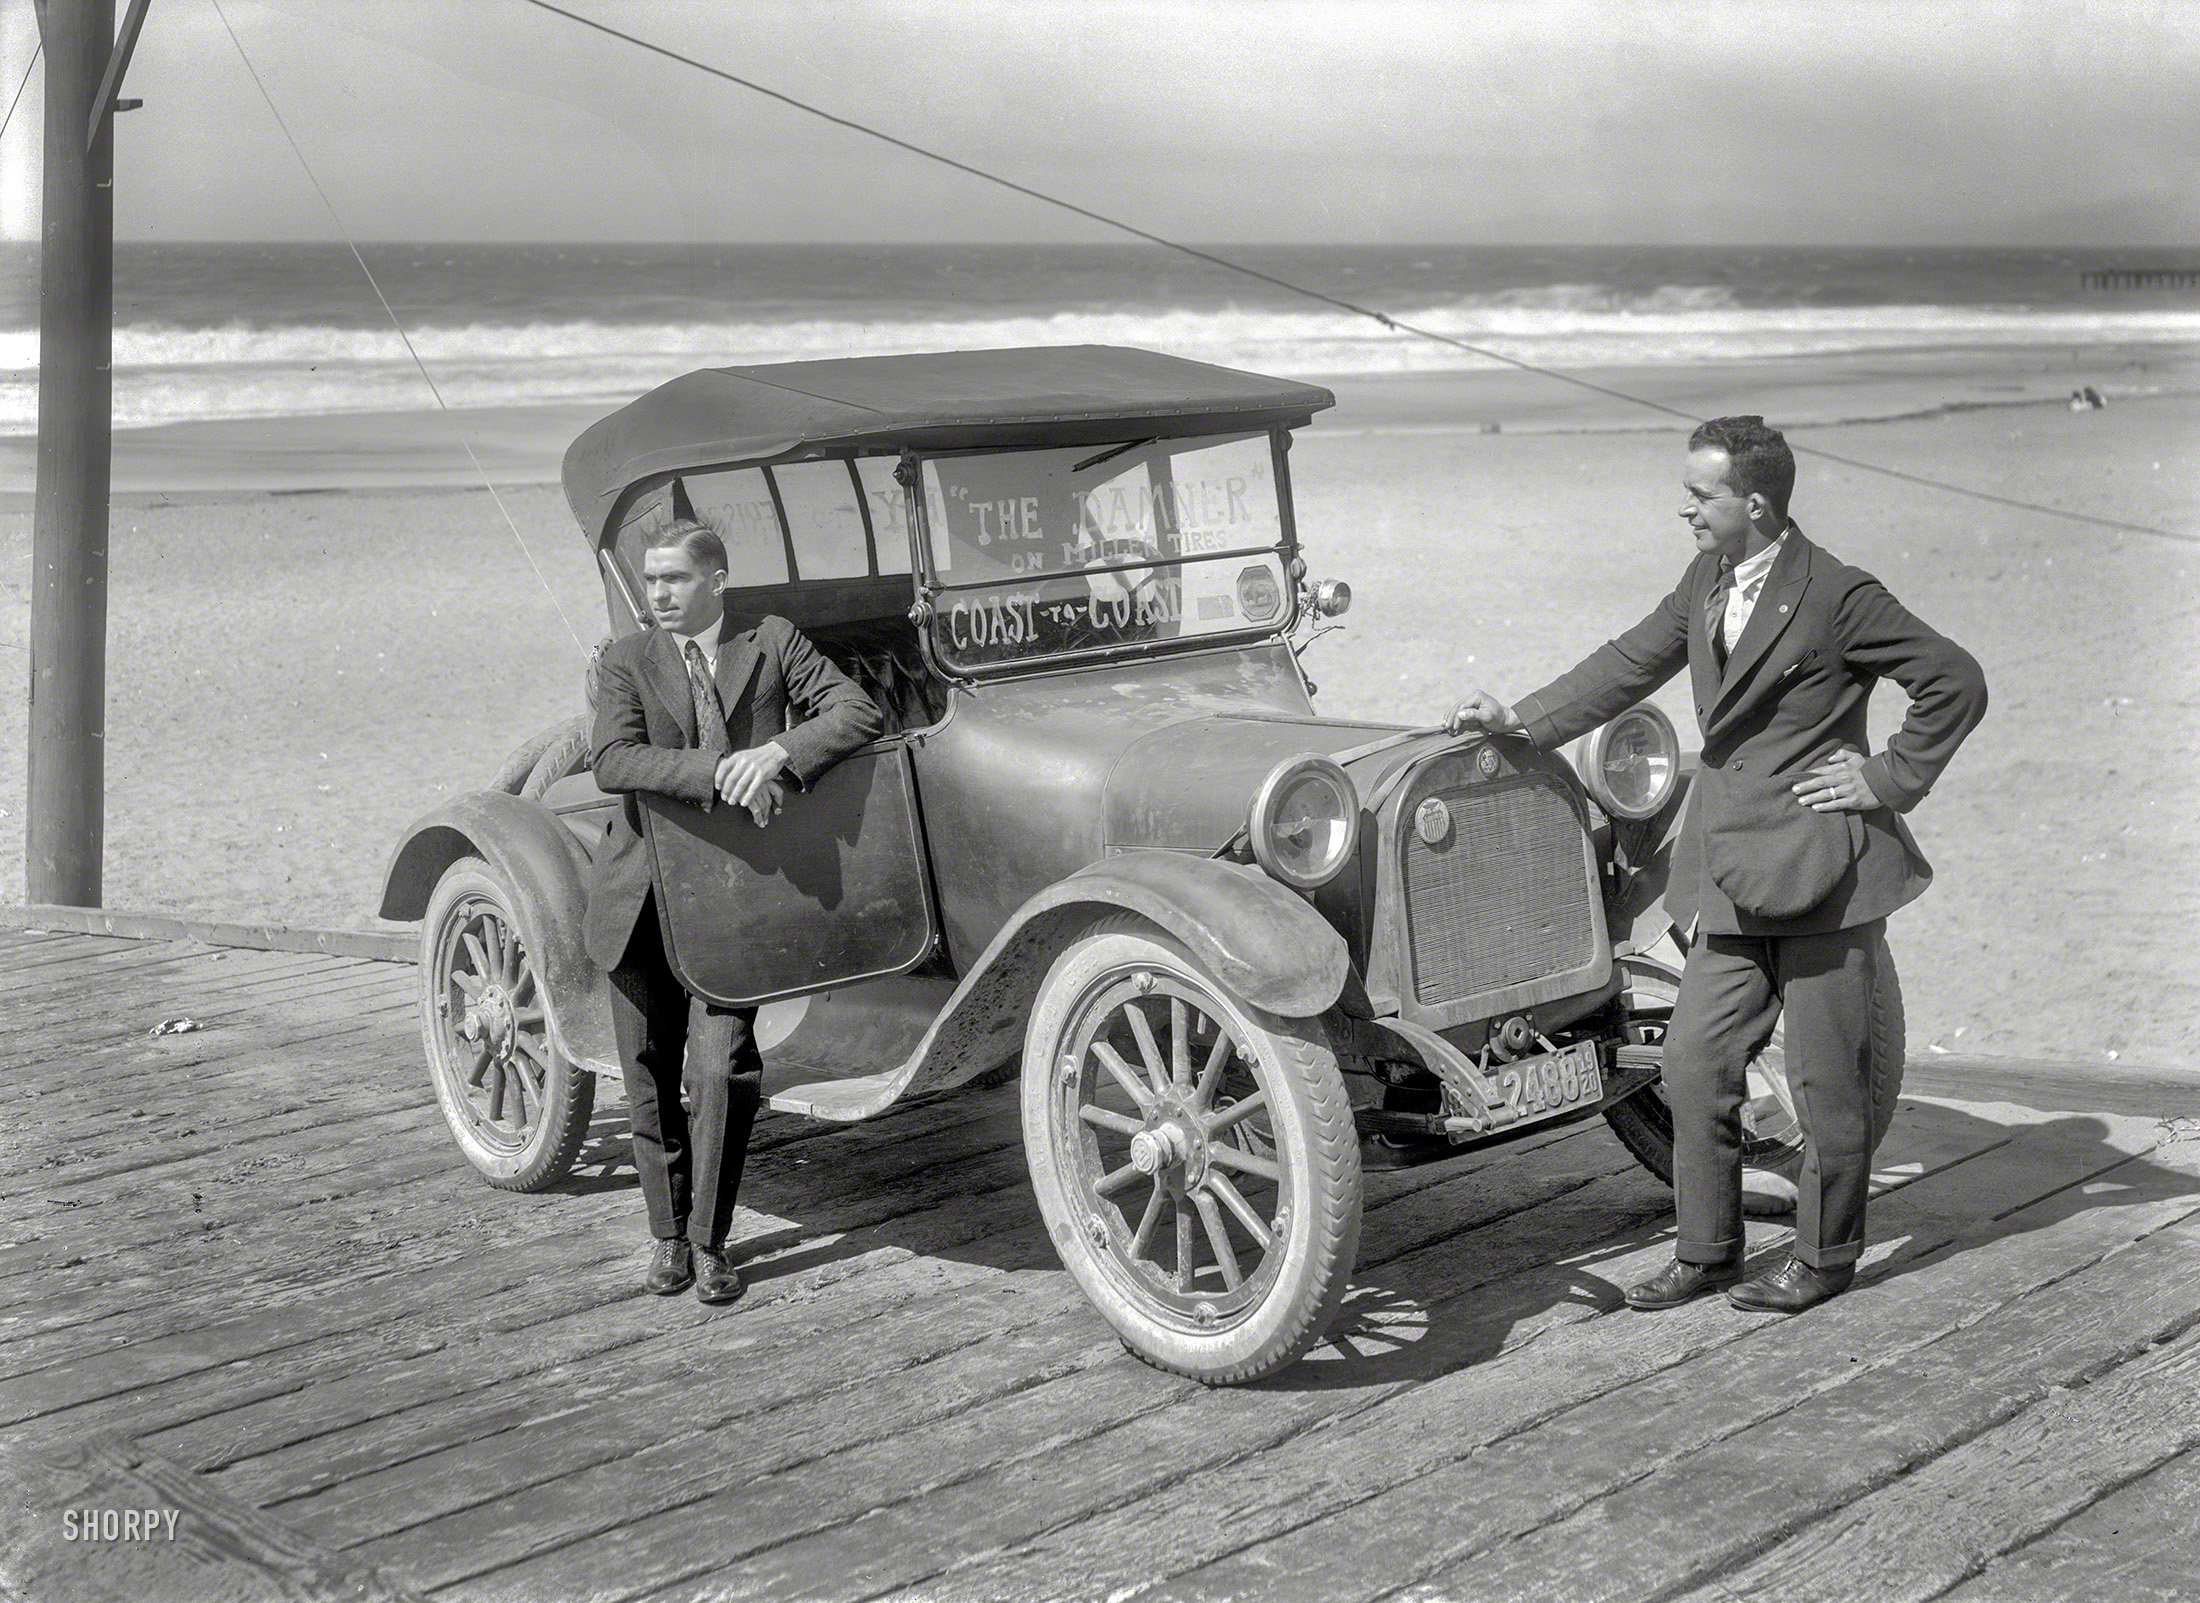 The Bay Area in 1920. "Dodge auto on boardwalk. 'The Damner' on Miller Tires Coast-to-Coast." All we know about what seems to have been a promotional stunt is preserved in this 5x7 glass negative by Christopher Helin. View full size.